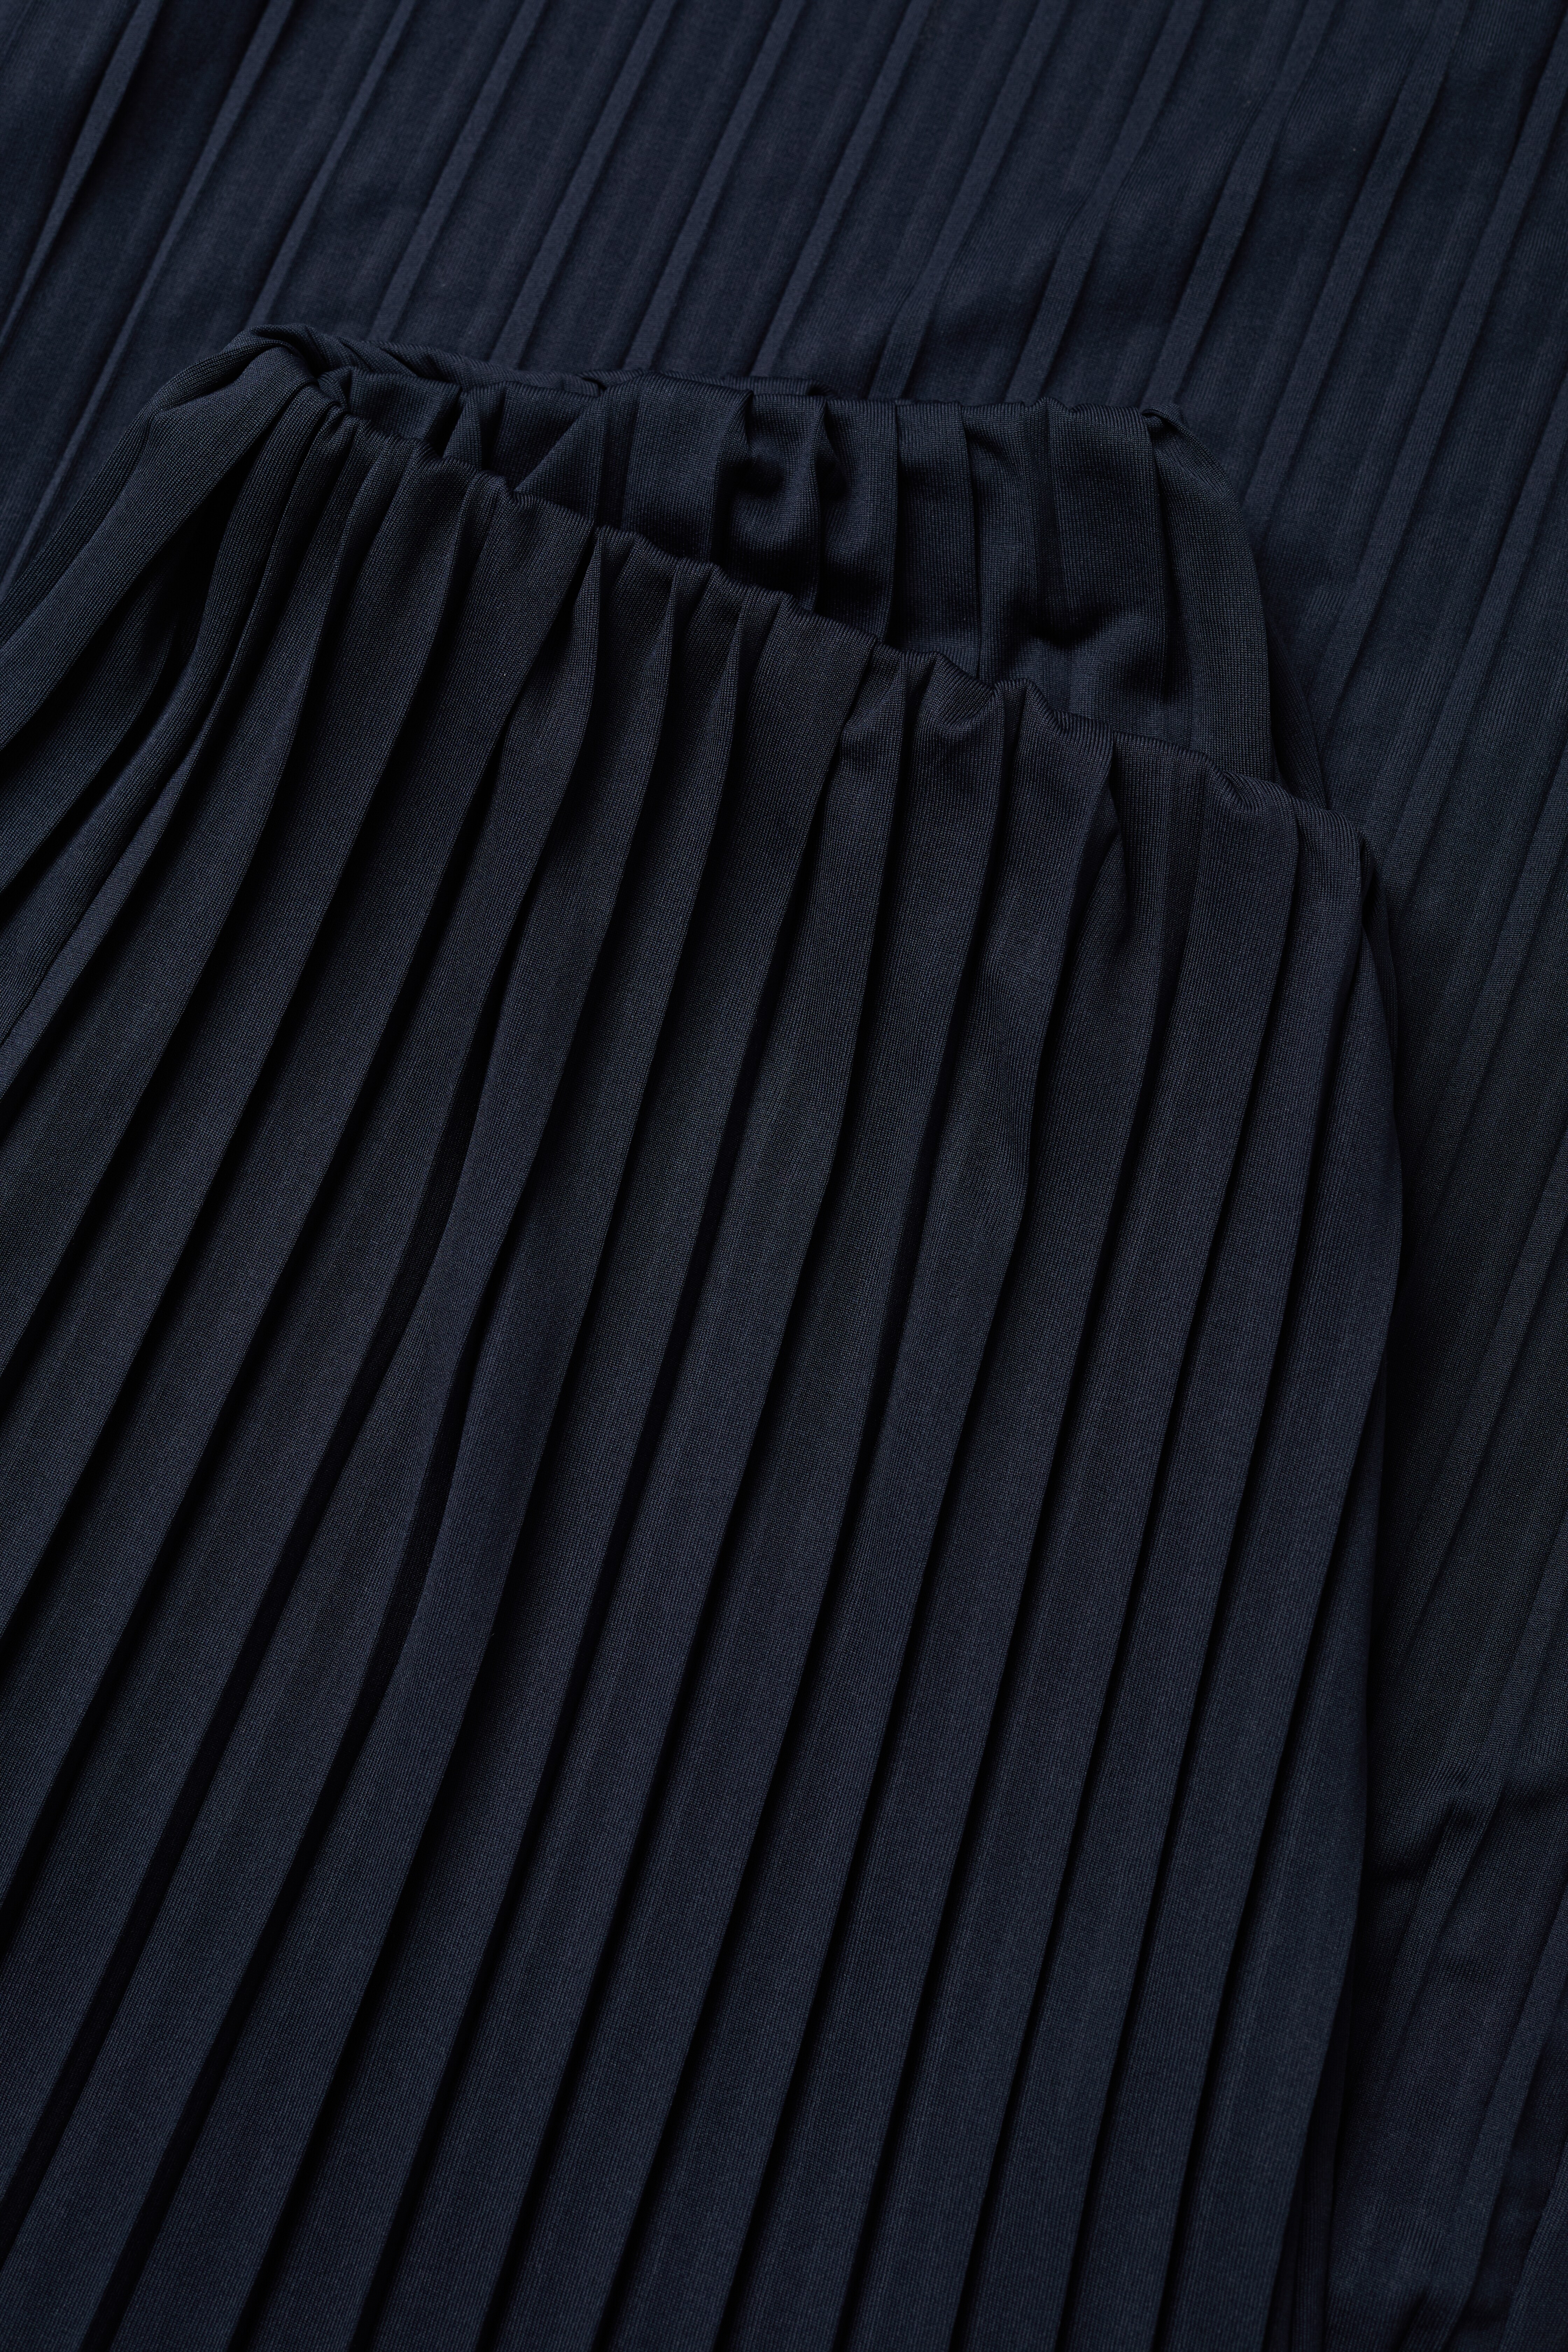 Pleated palazzo pants - Details of the article 8